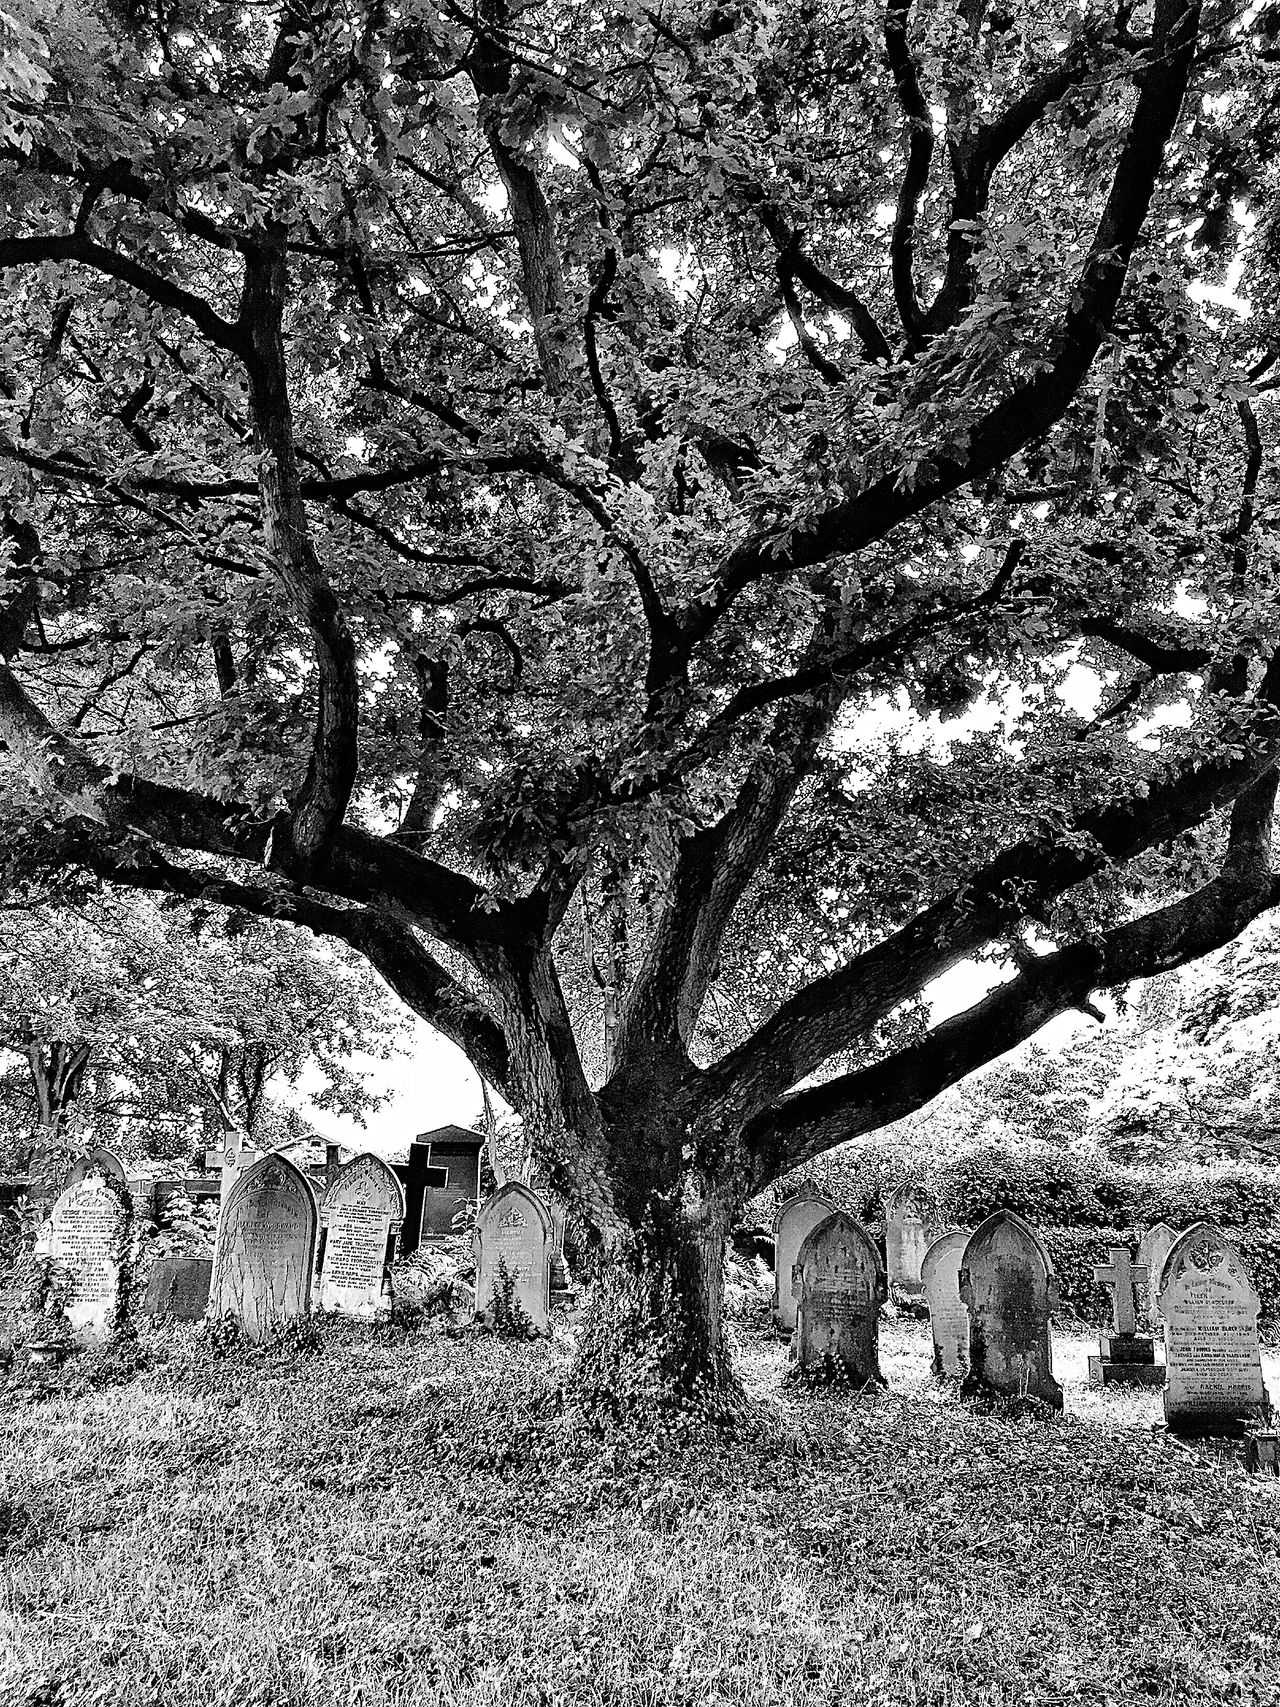 Black and white image of a tree in a cemetery